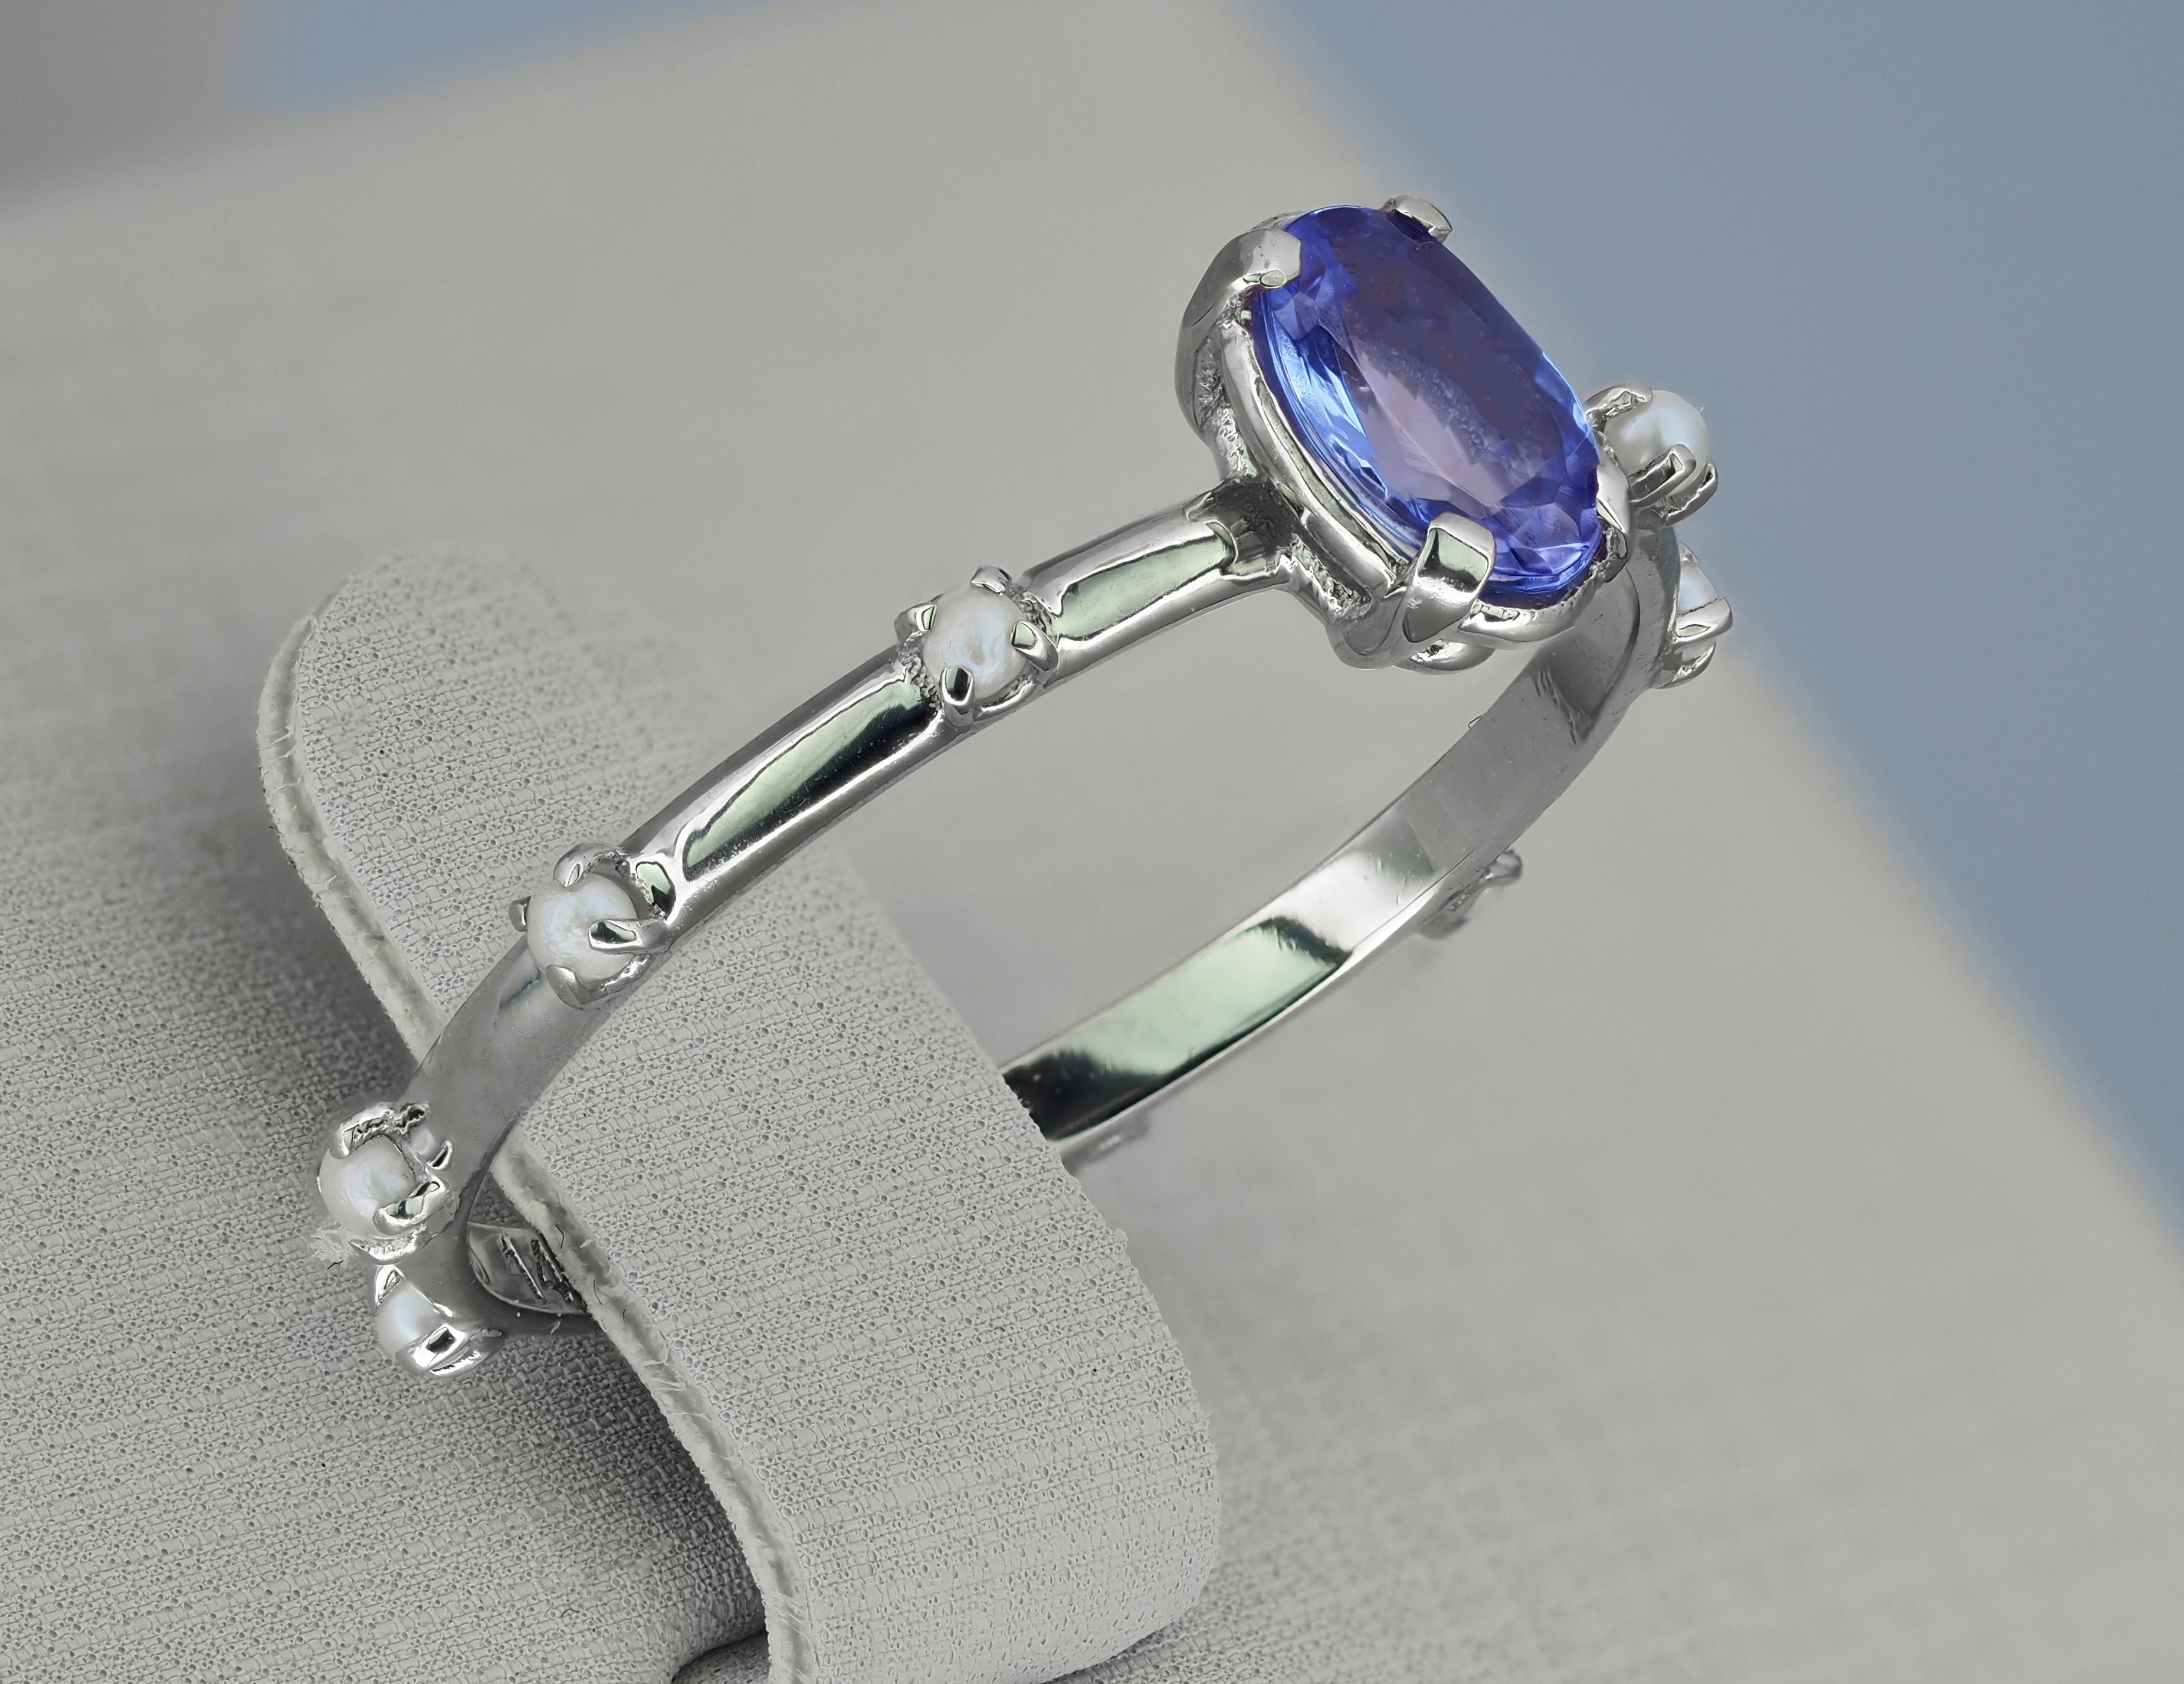 For Sale:  Tanzanite and pearls 14k gold ring. Real tanzanite gold ring.  6